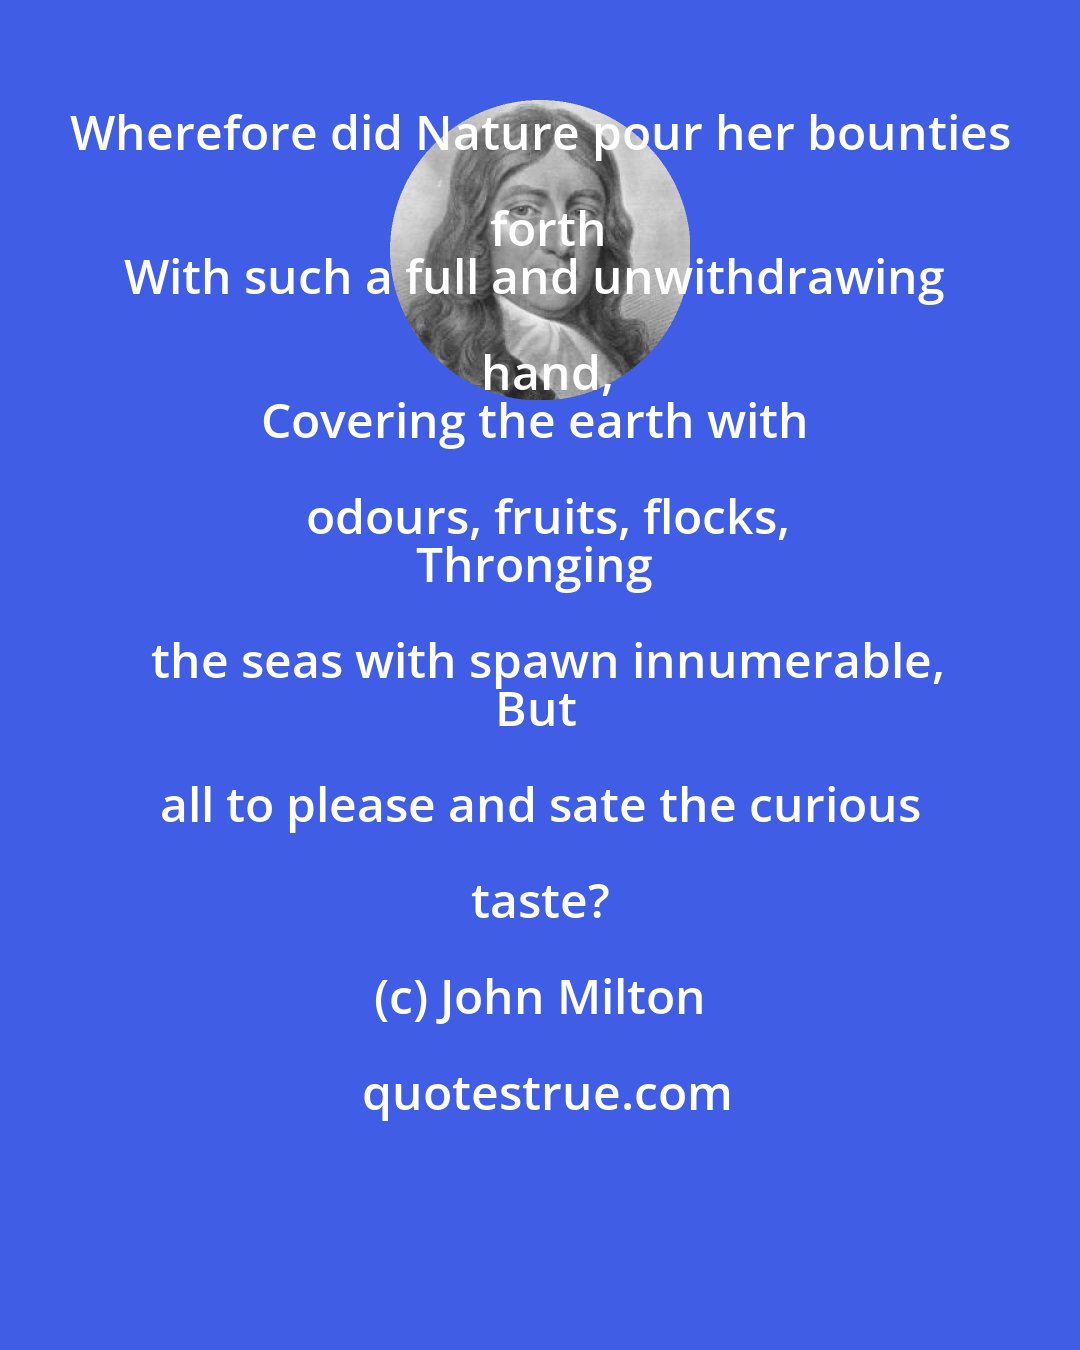 John Milton: Wherefore did Nature pour her bounties forth
With such a full and unwithdrawing hand,
Covering the earth with odours, fruits, flocks,
Thronging the seas with spawn innumerable,
But all to please and sate the curious taste?